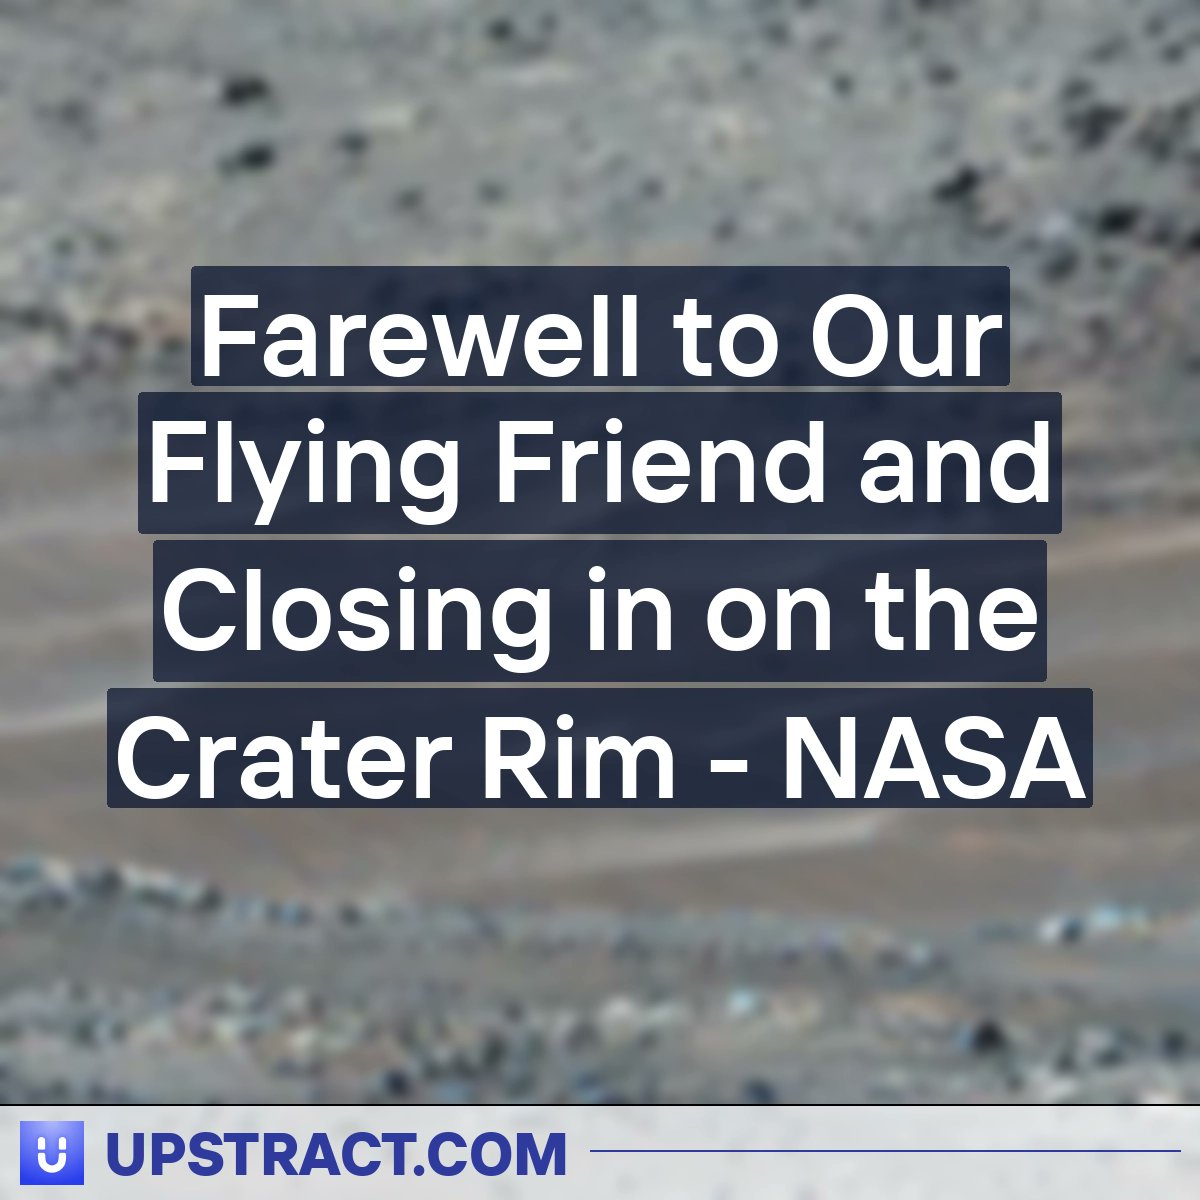 Farewell to Our Flying Friend and Closing in on the Crater Rim - NASA
#craterrimwritten #henrymanelski #nathanwilliams
mars.nasa.gov/mars2020/missi…